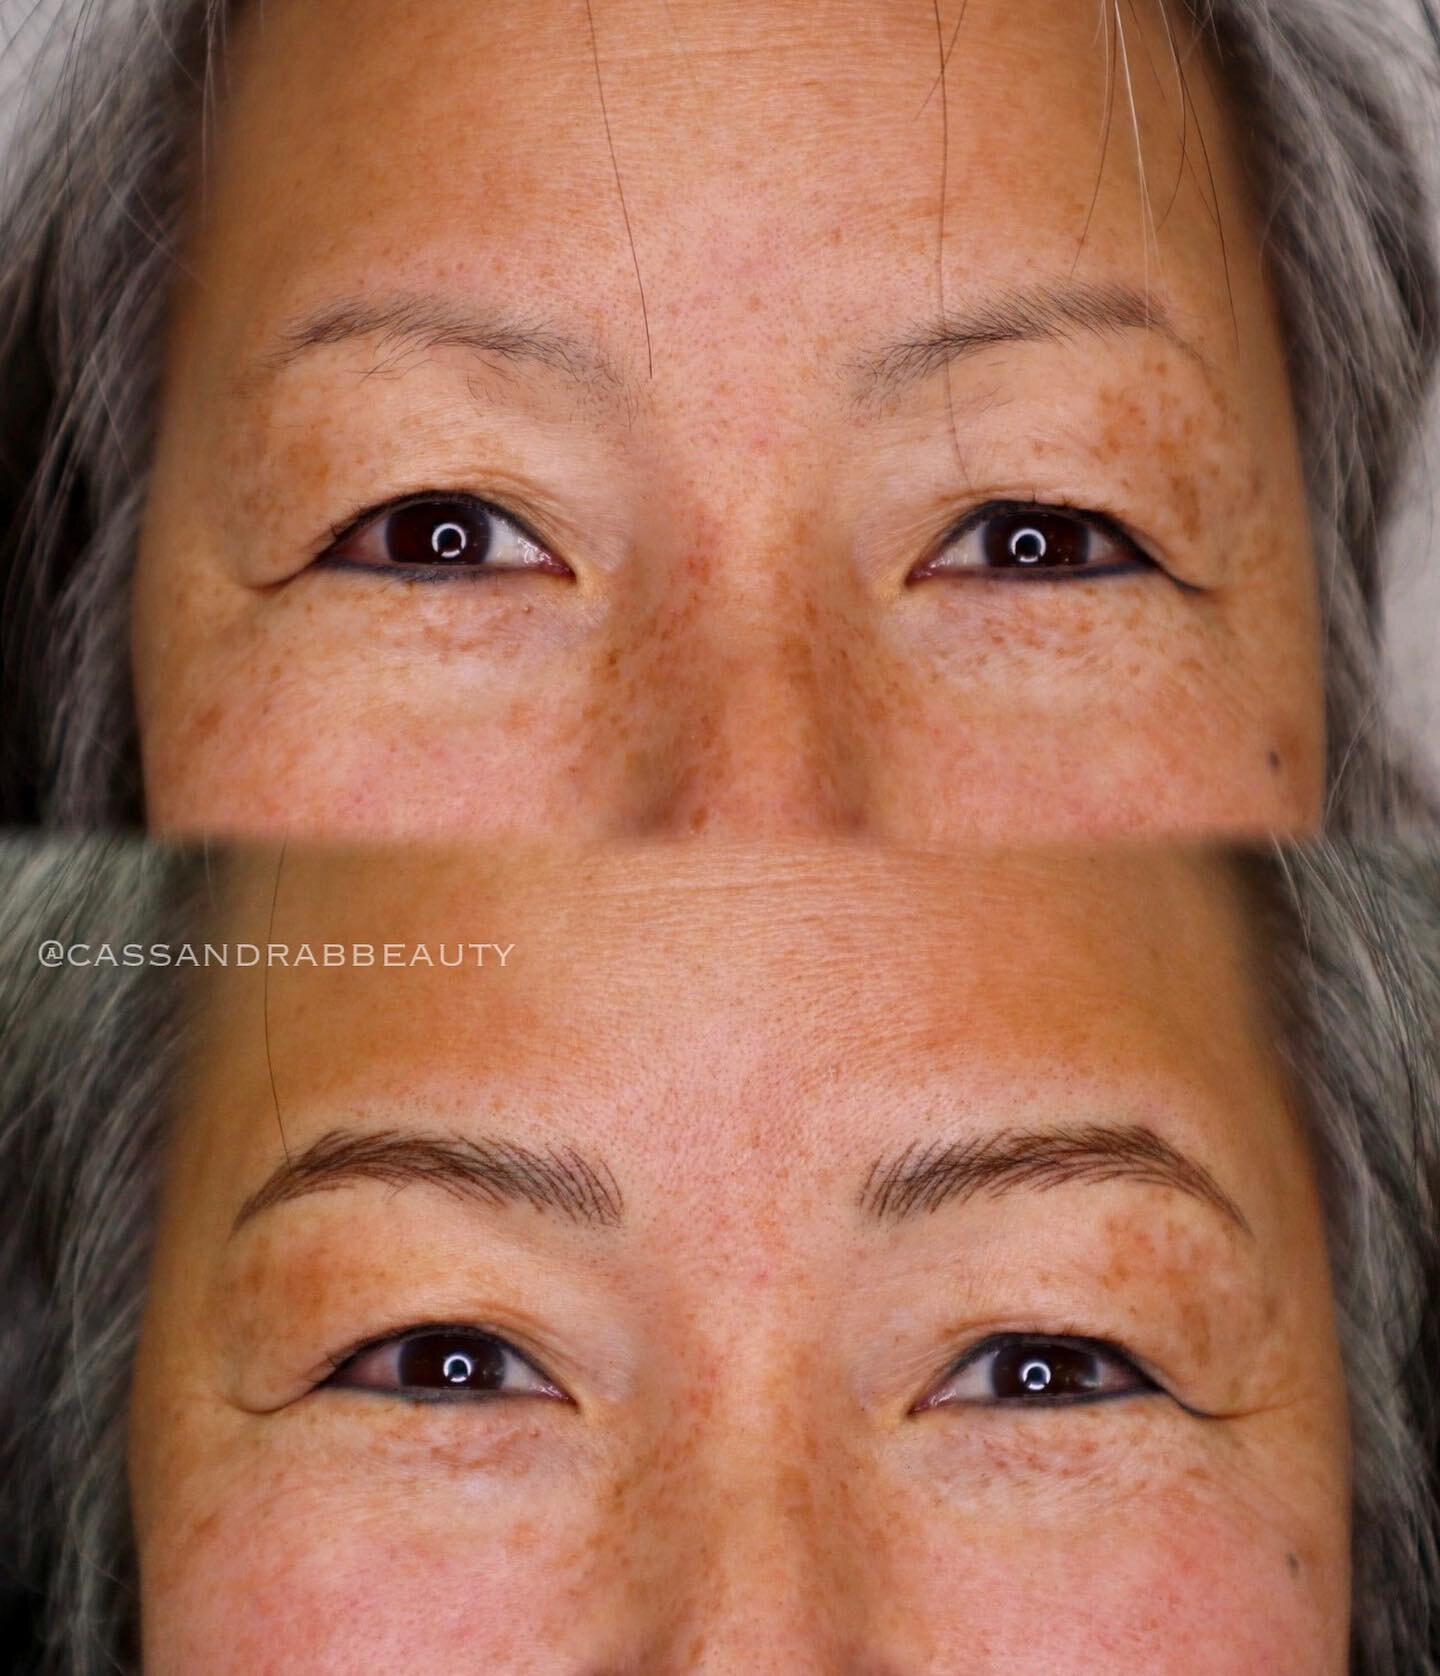 Dreamy new Nano Brows ☁️☁️
Results will soften and lighten ~20% with healing before returning for touch up session.
-
NANO PROMO this month only, save $100. Book through link in bio! 🗓️
.
.
.
.
#Eyebrowslangley #langleyeyebrows #surreyeyebrows #eyeb